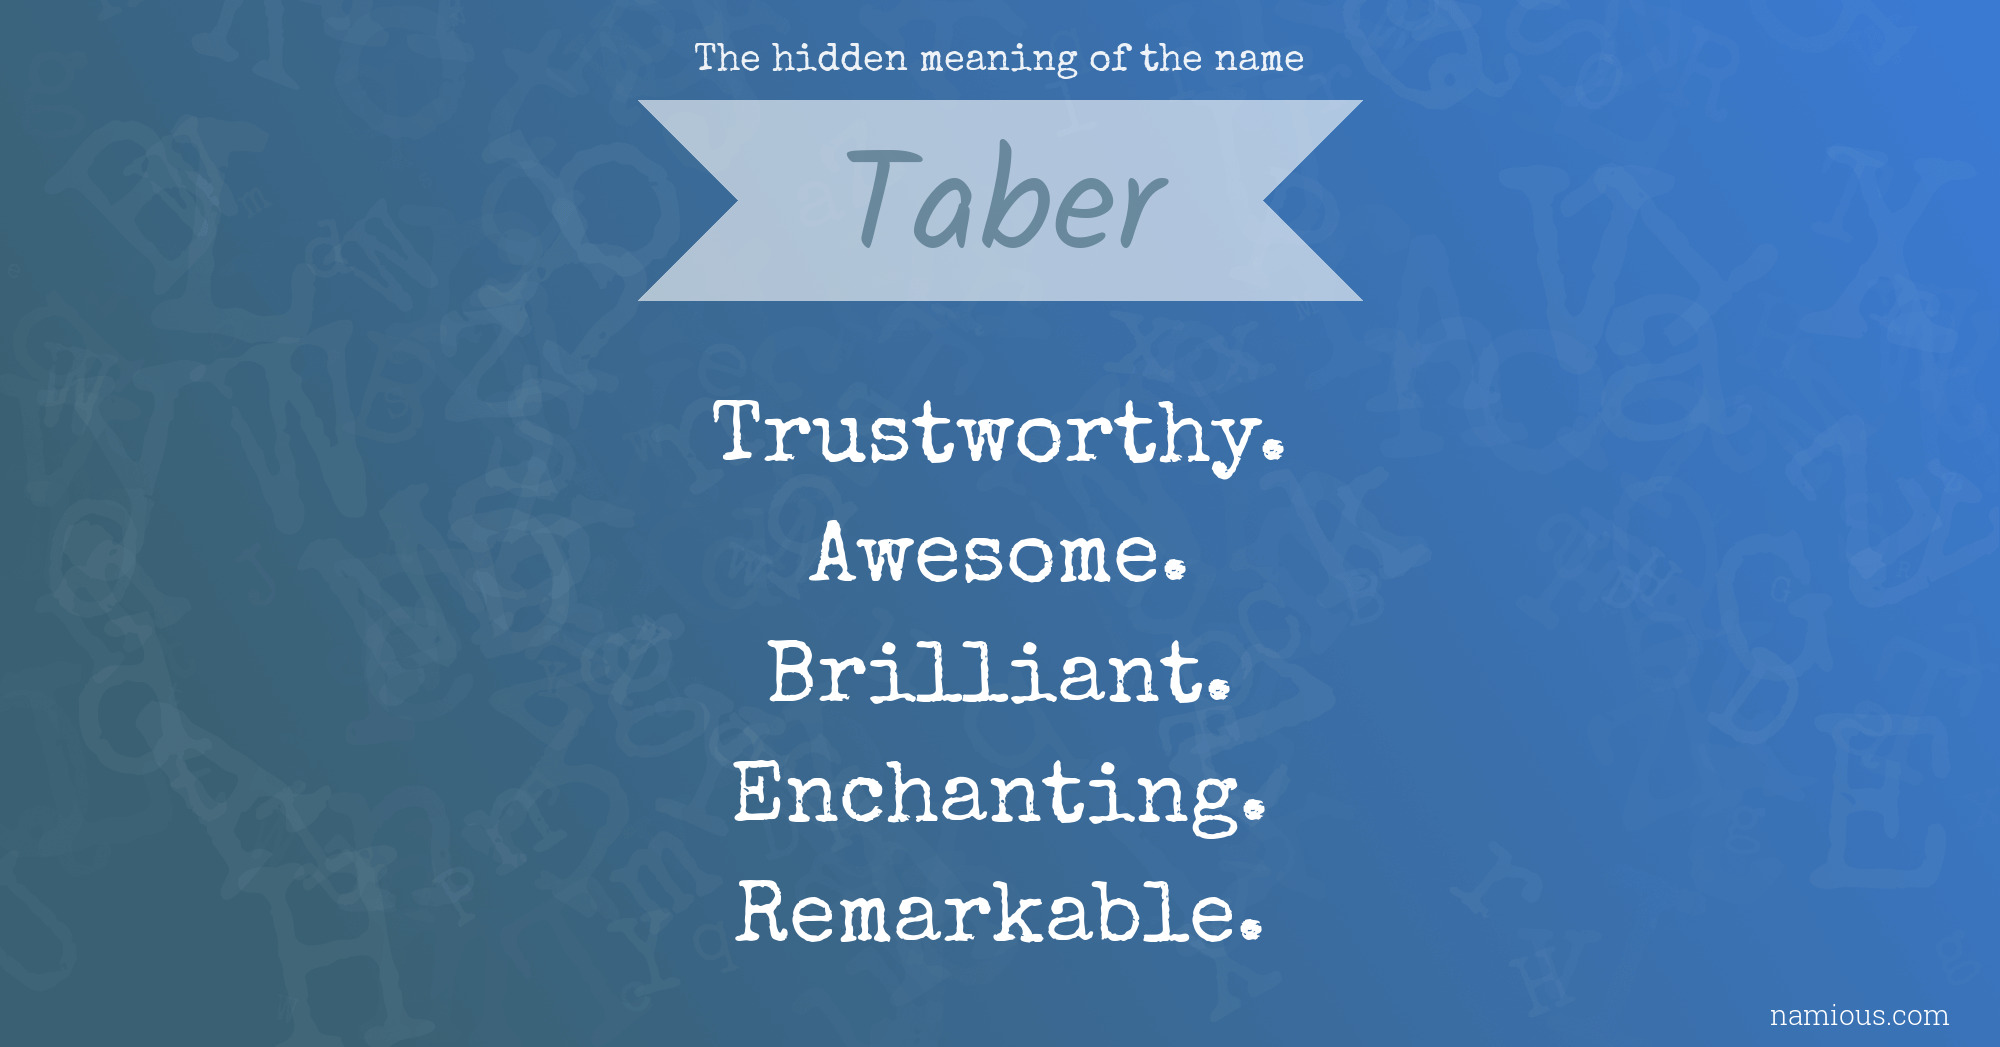 The hidden meaning of the name Taber